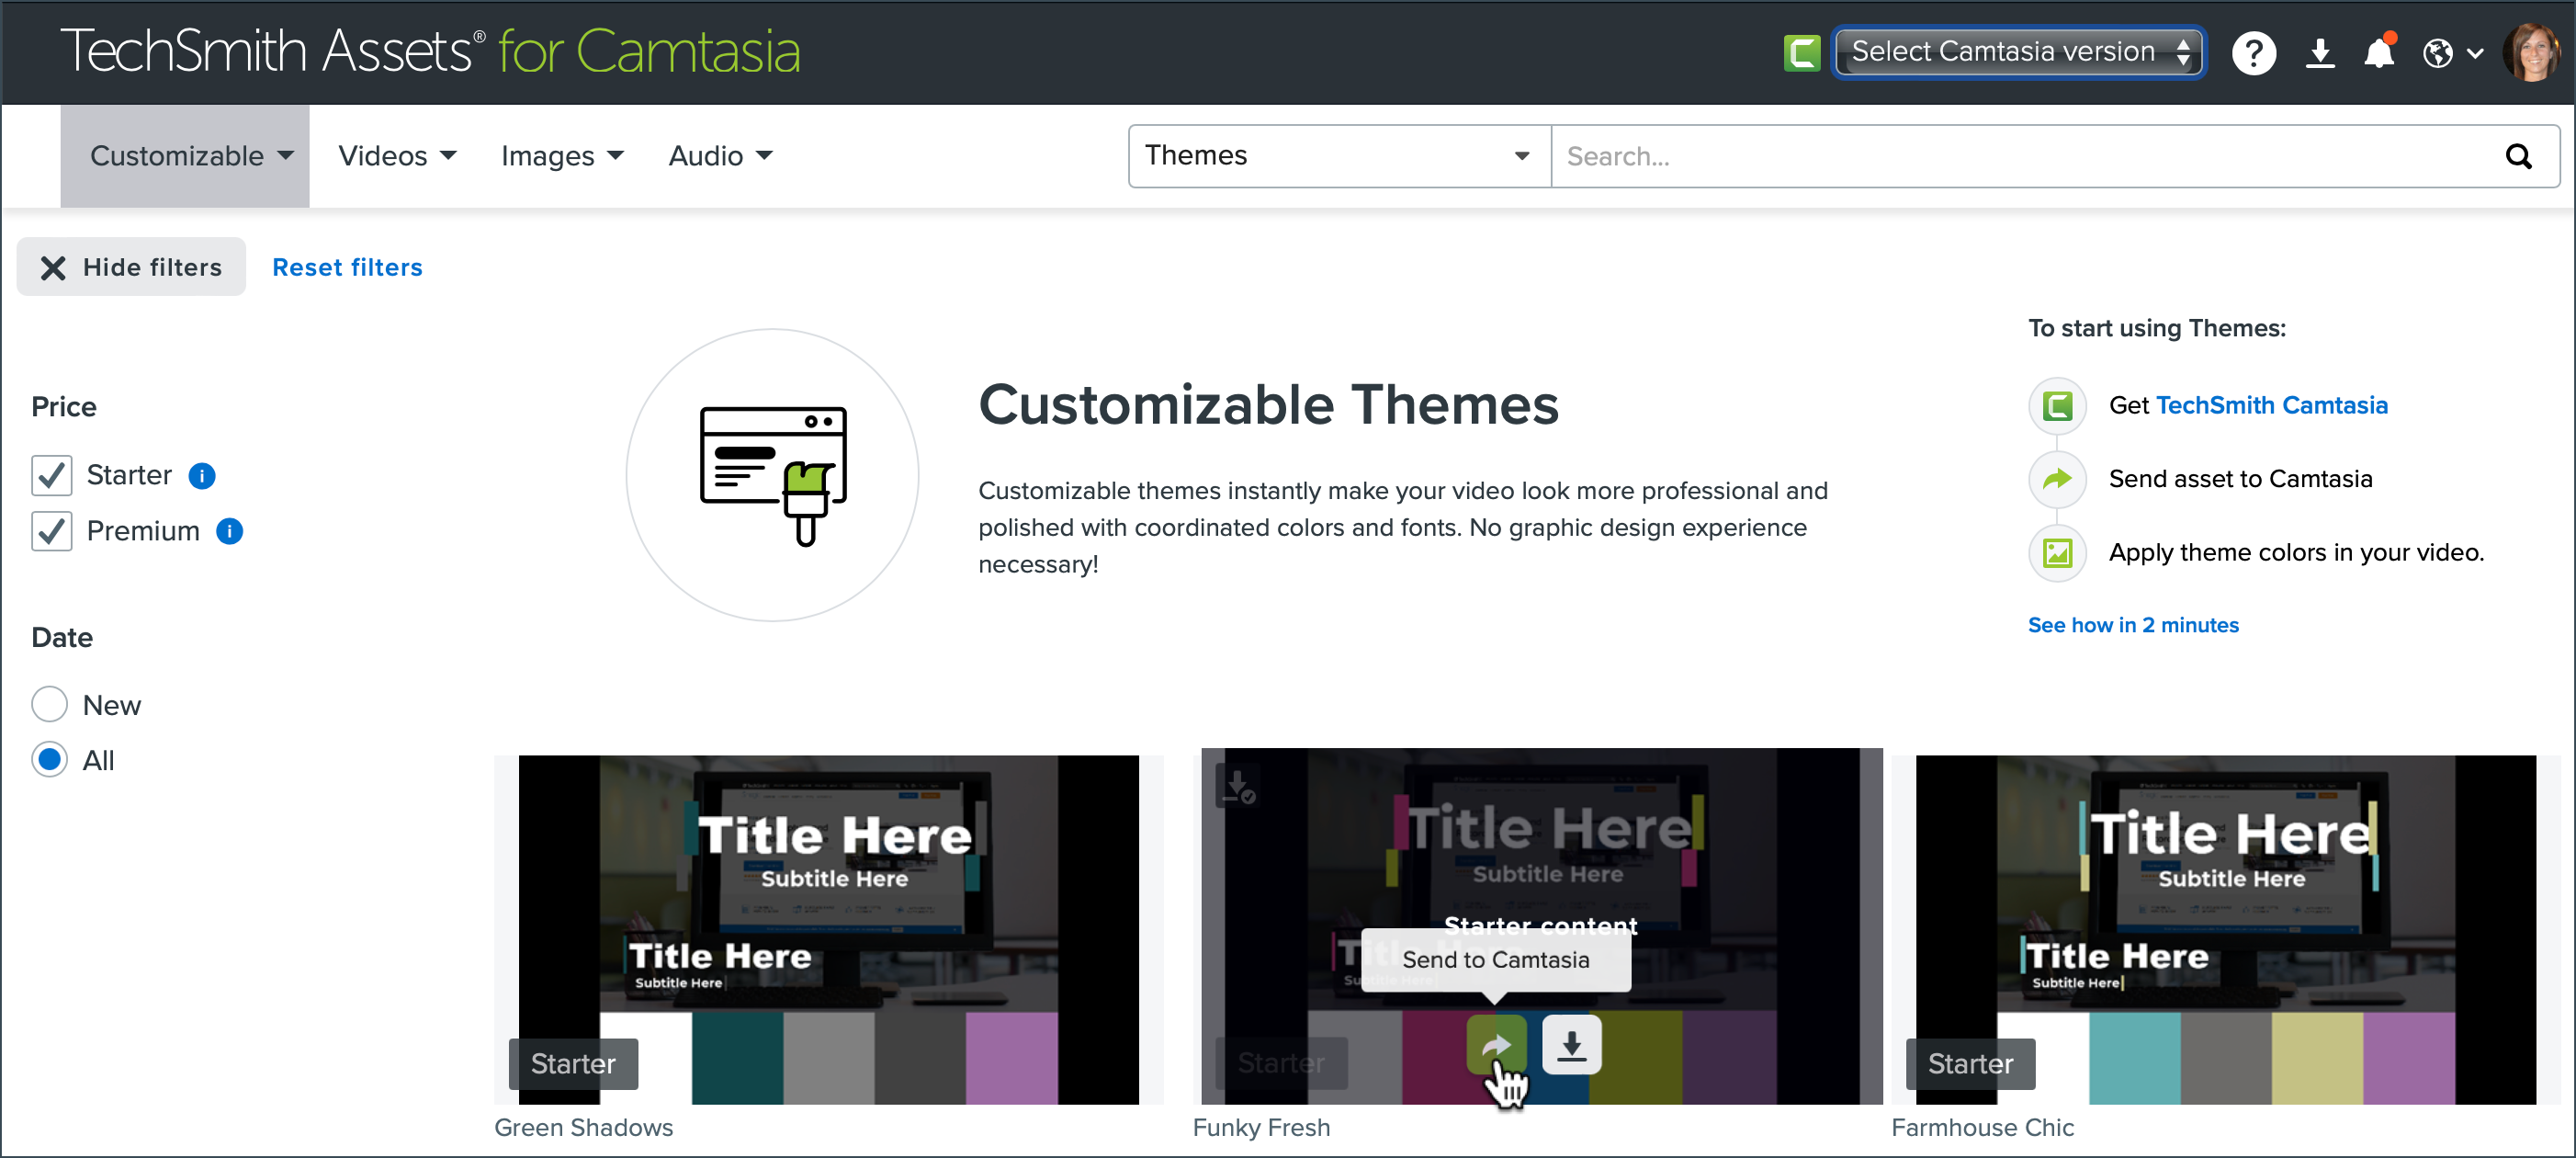 Download theme from Camtasia Assets website